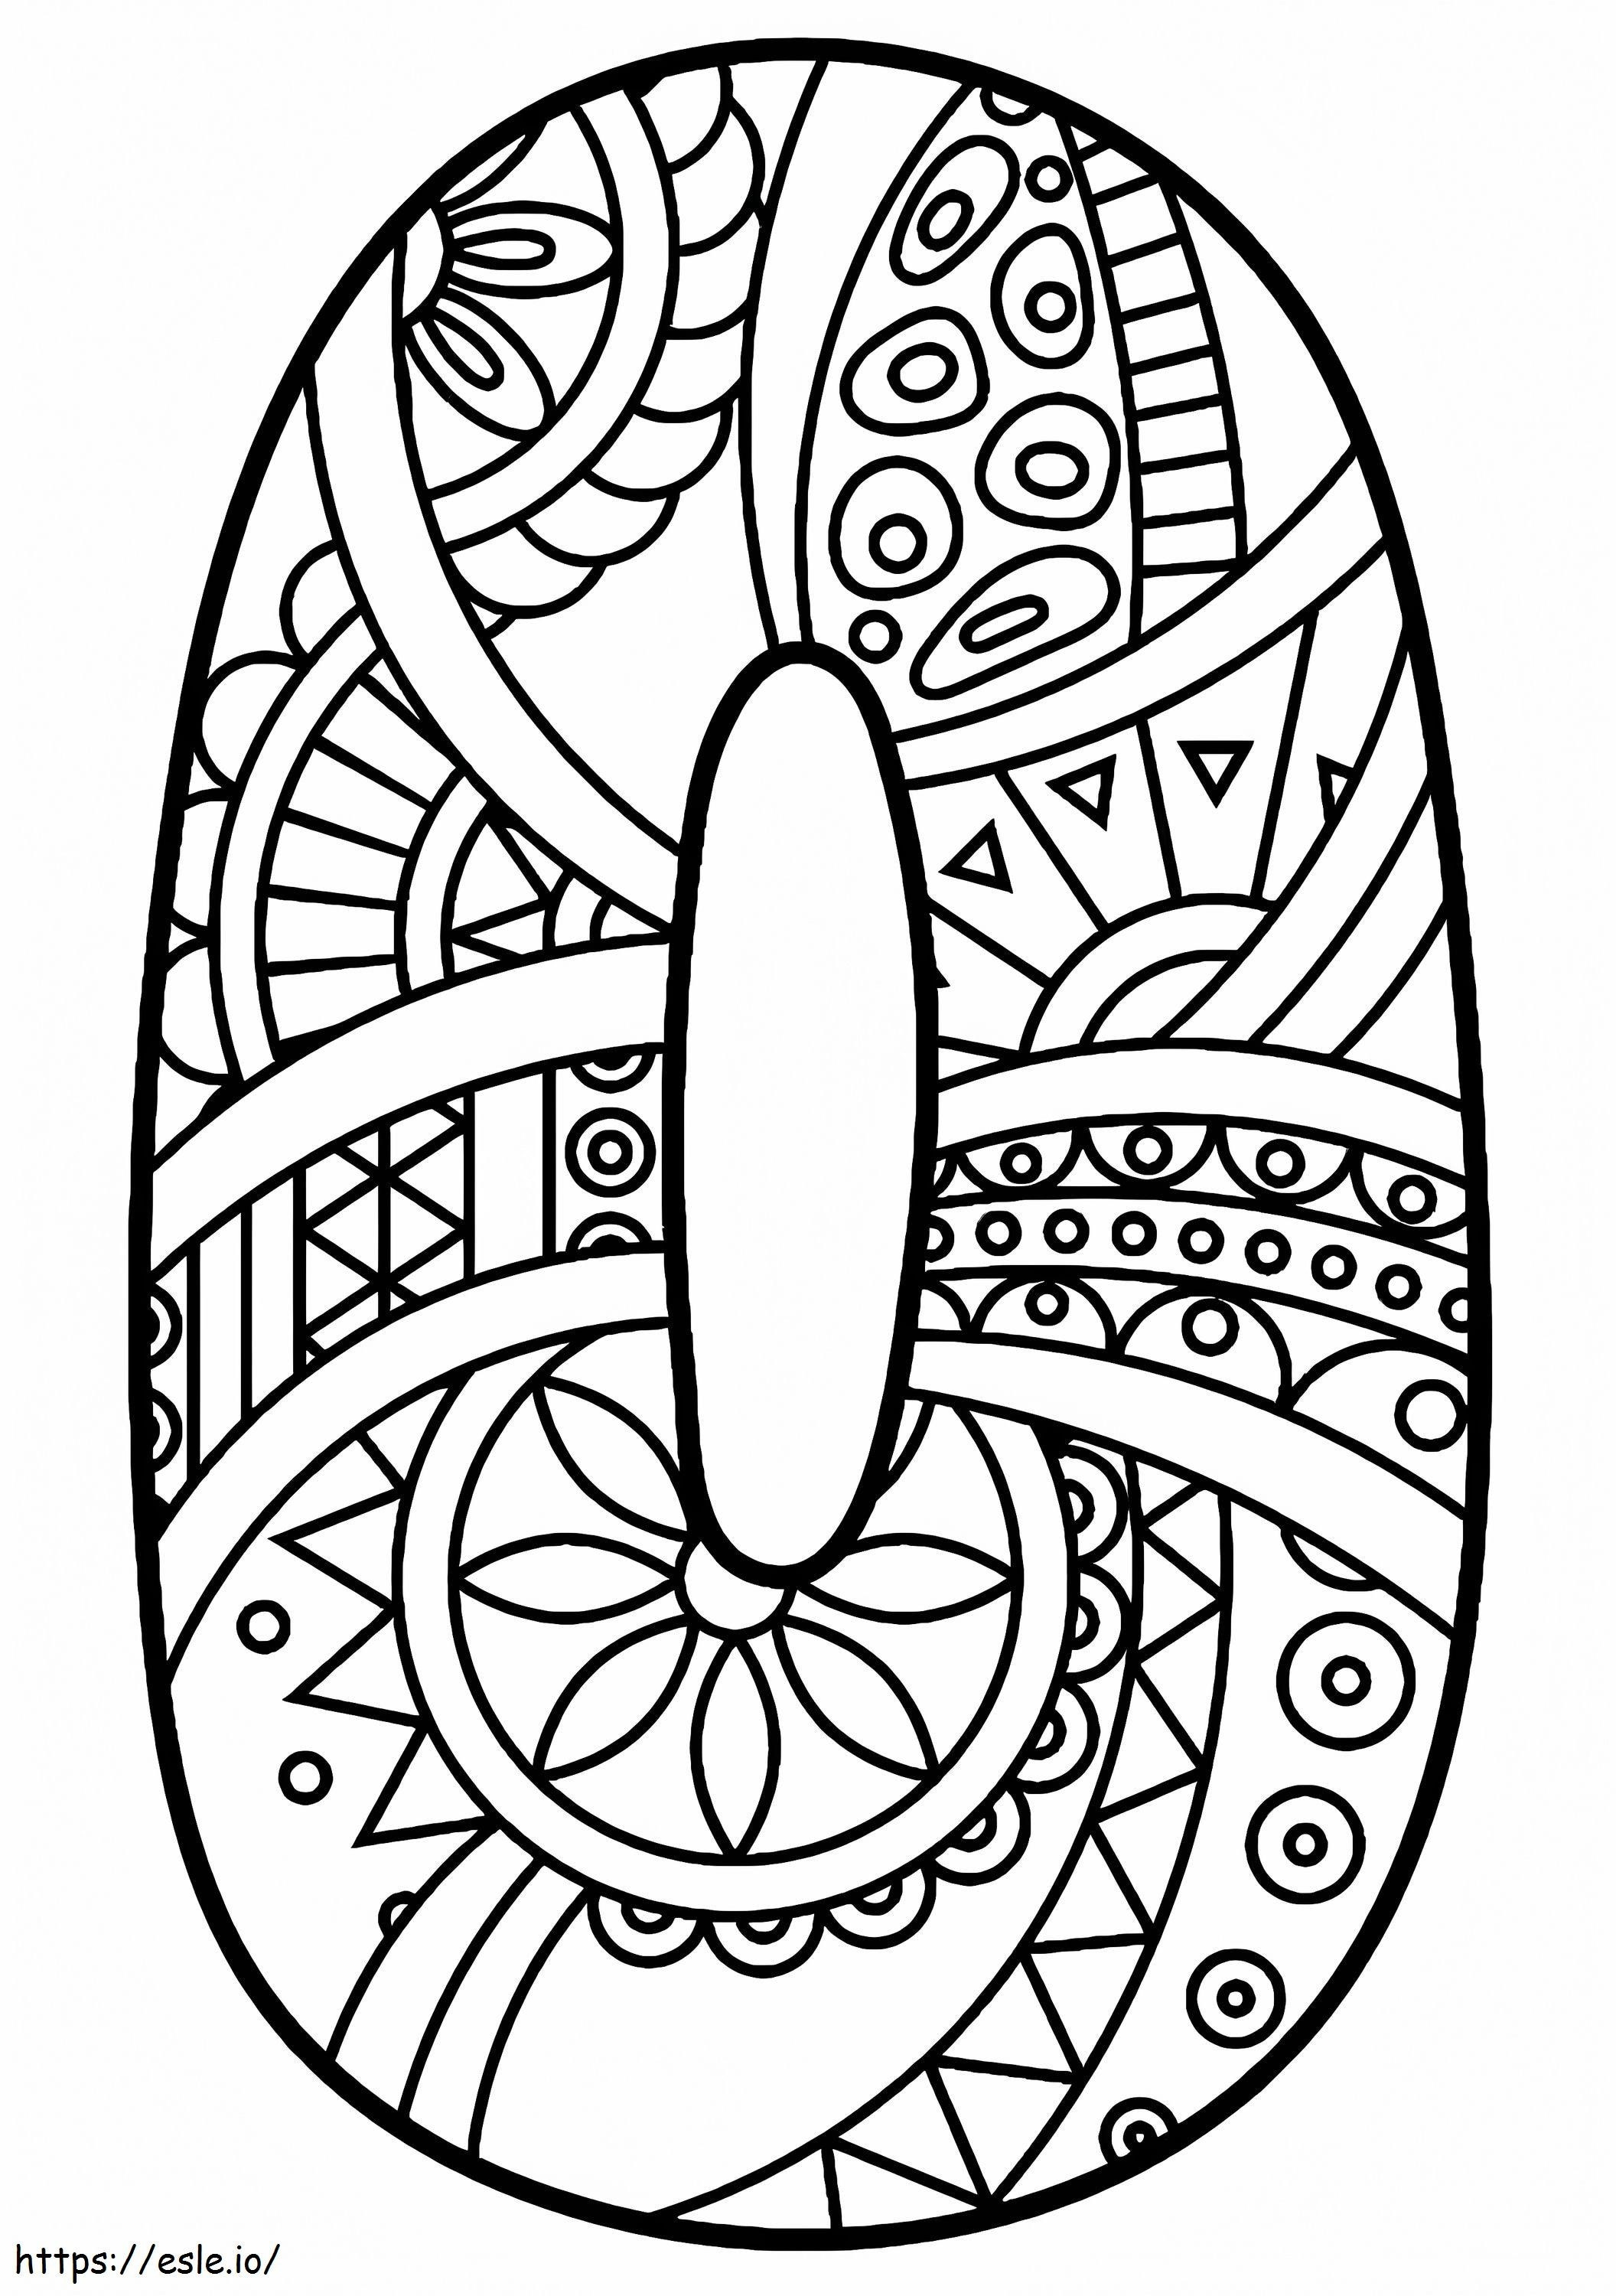 Number 0 Zentangle coloring page